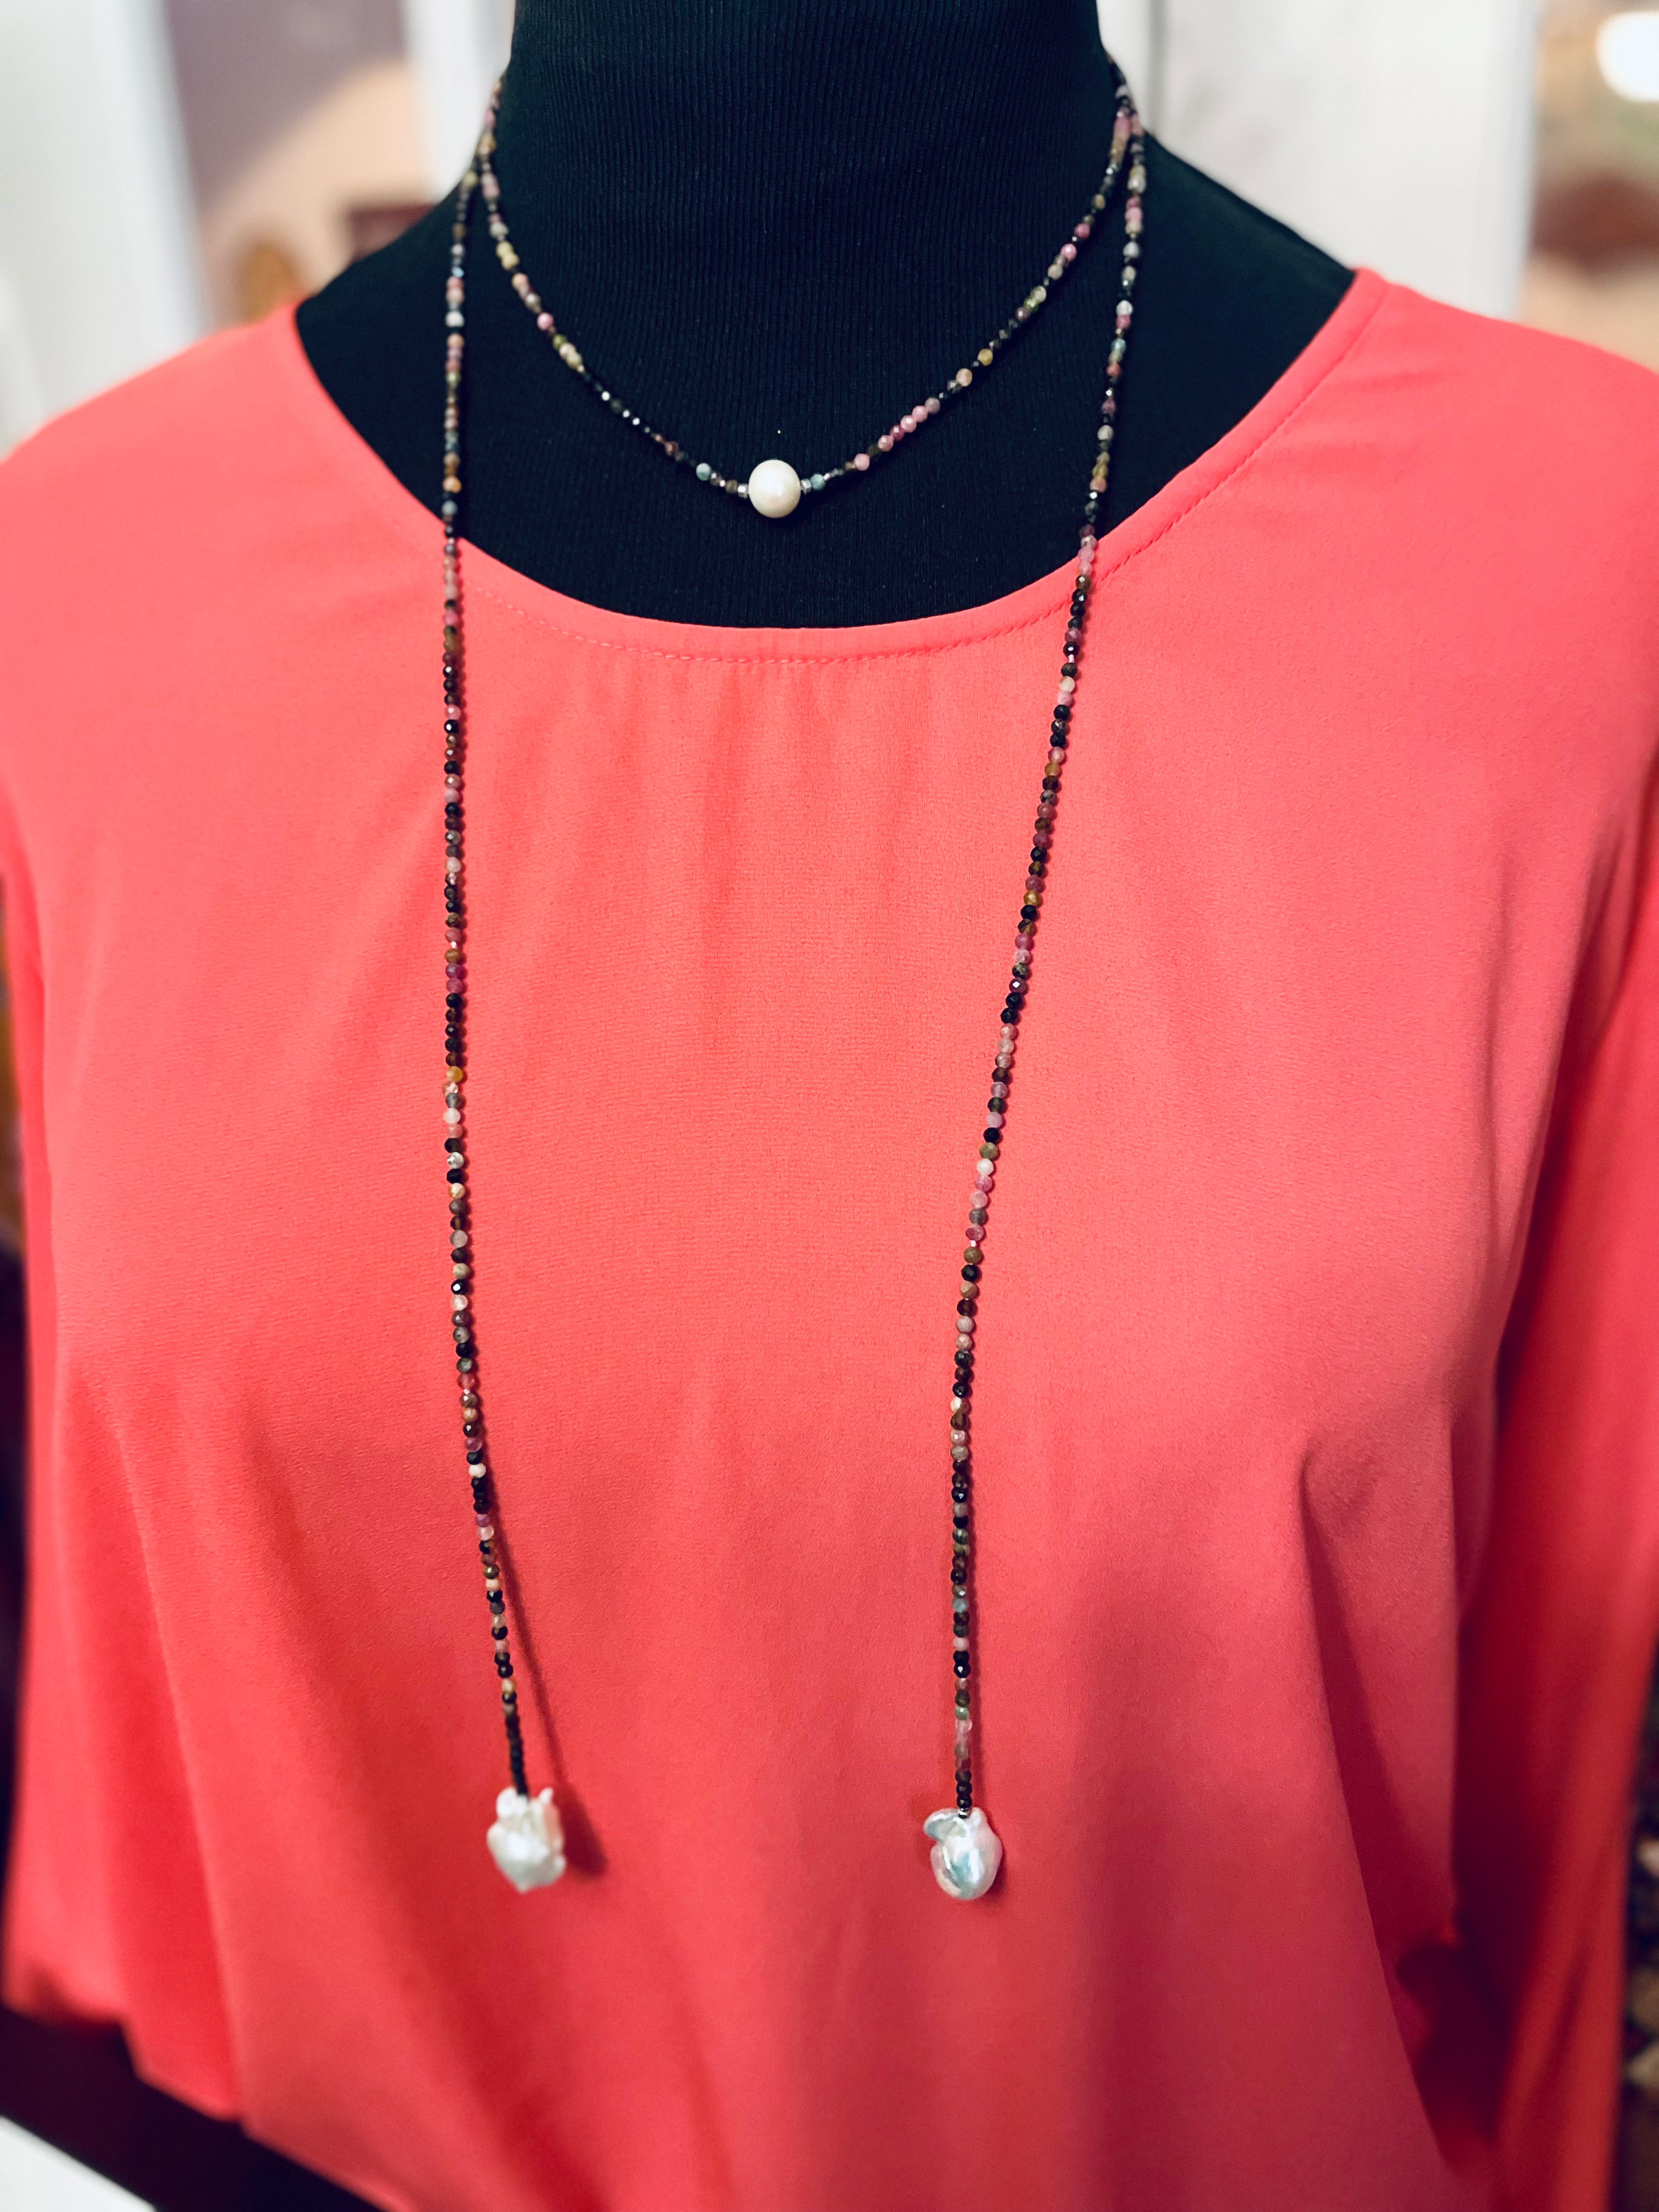 Lovely in a Lariat Necklace